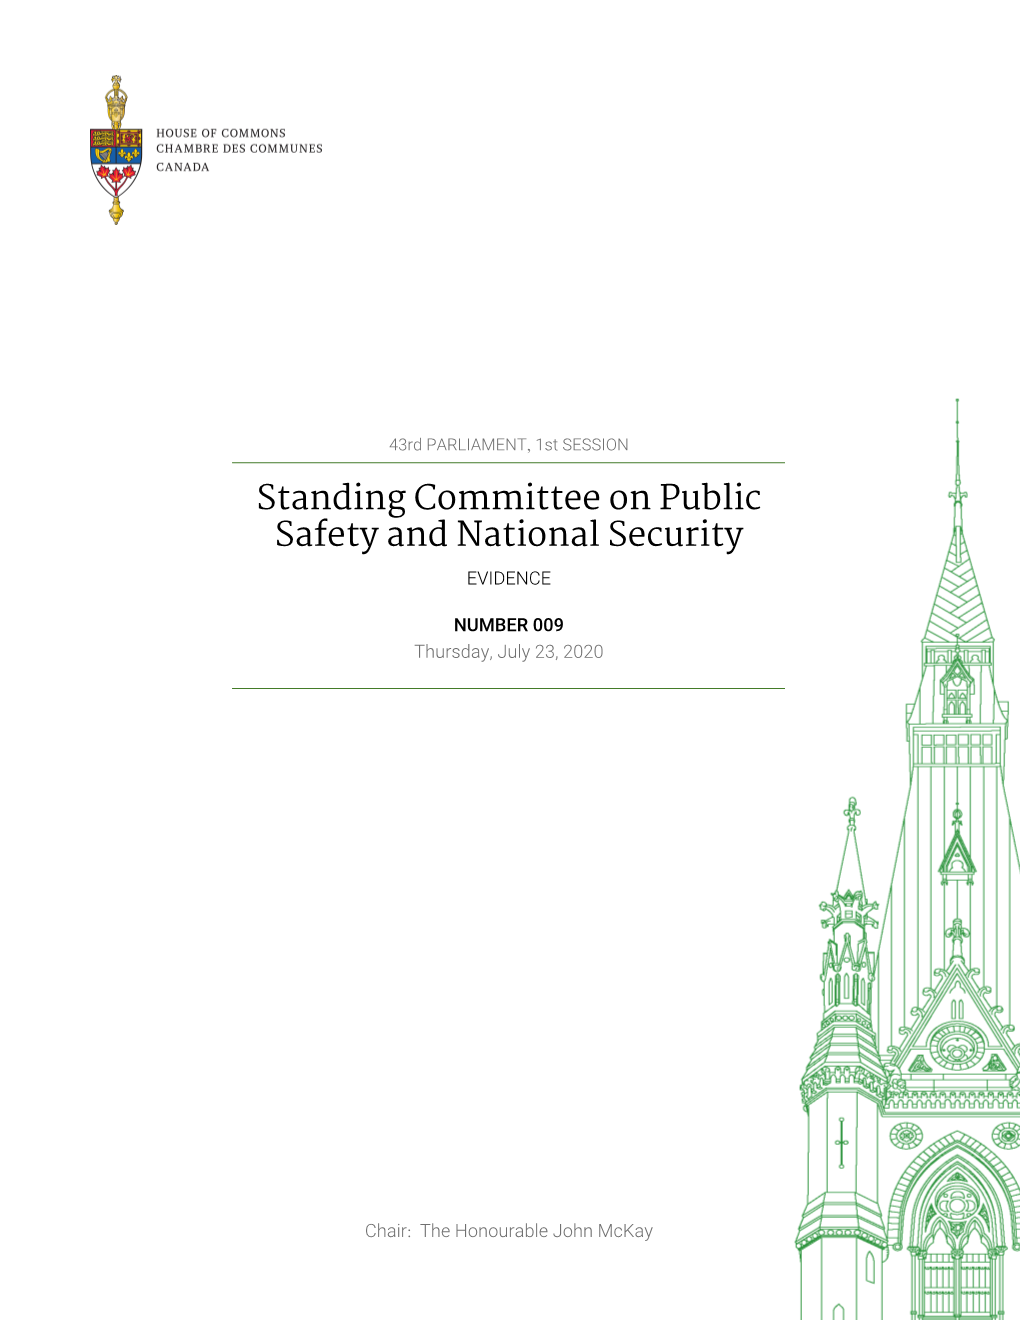 Evidence of the Standing Committee on Public Safety and National Security